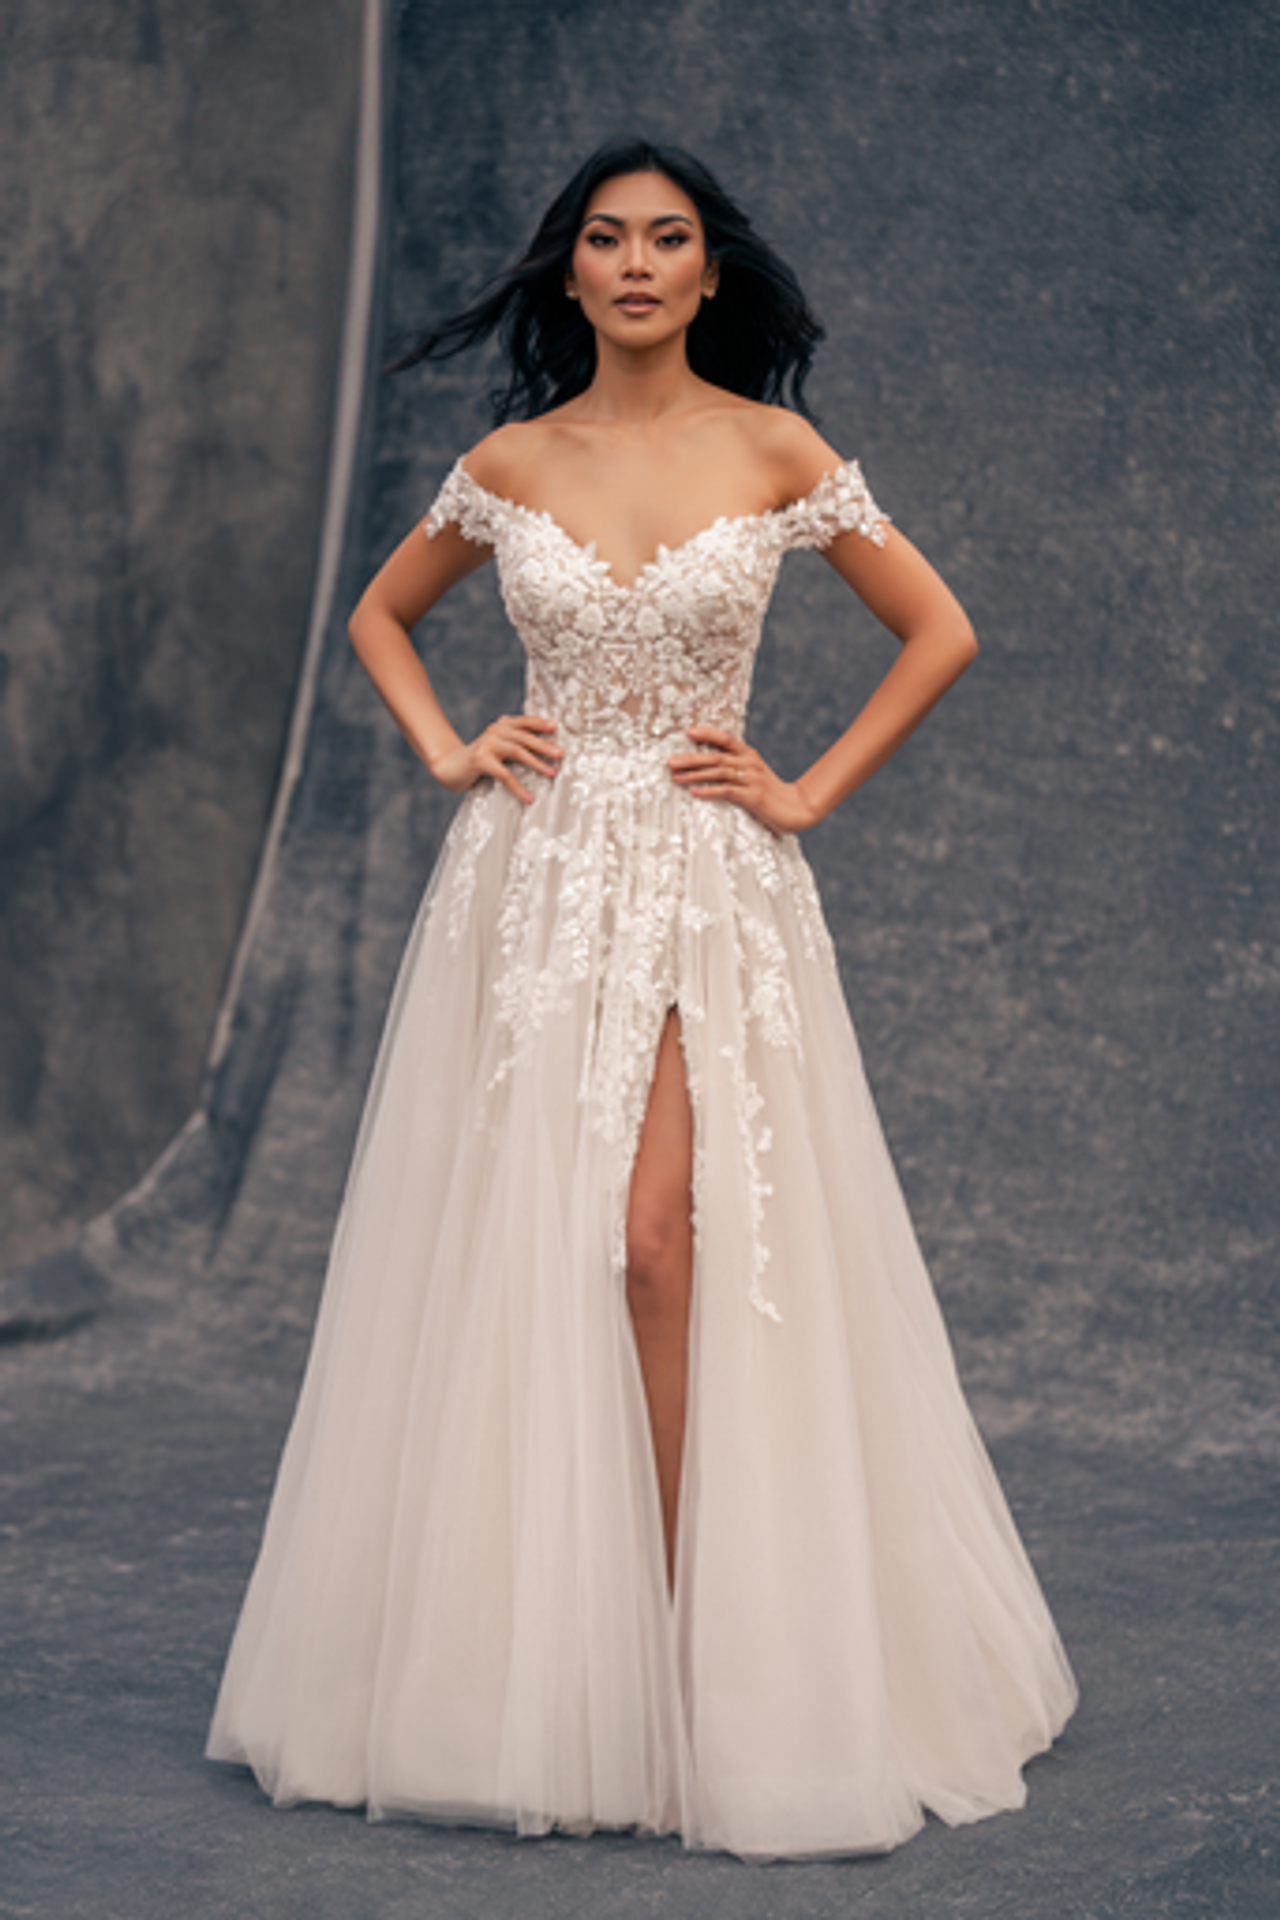 Sexy Feminin And Romantic Gown by Allure Bridals - Image 2